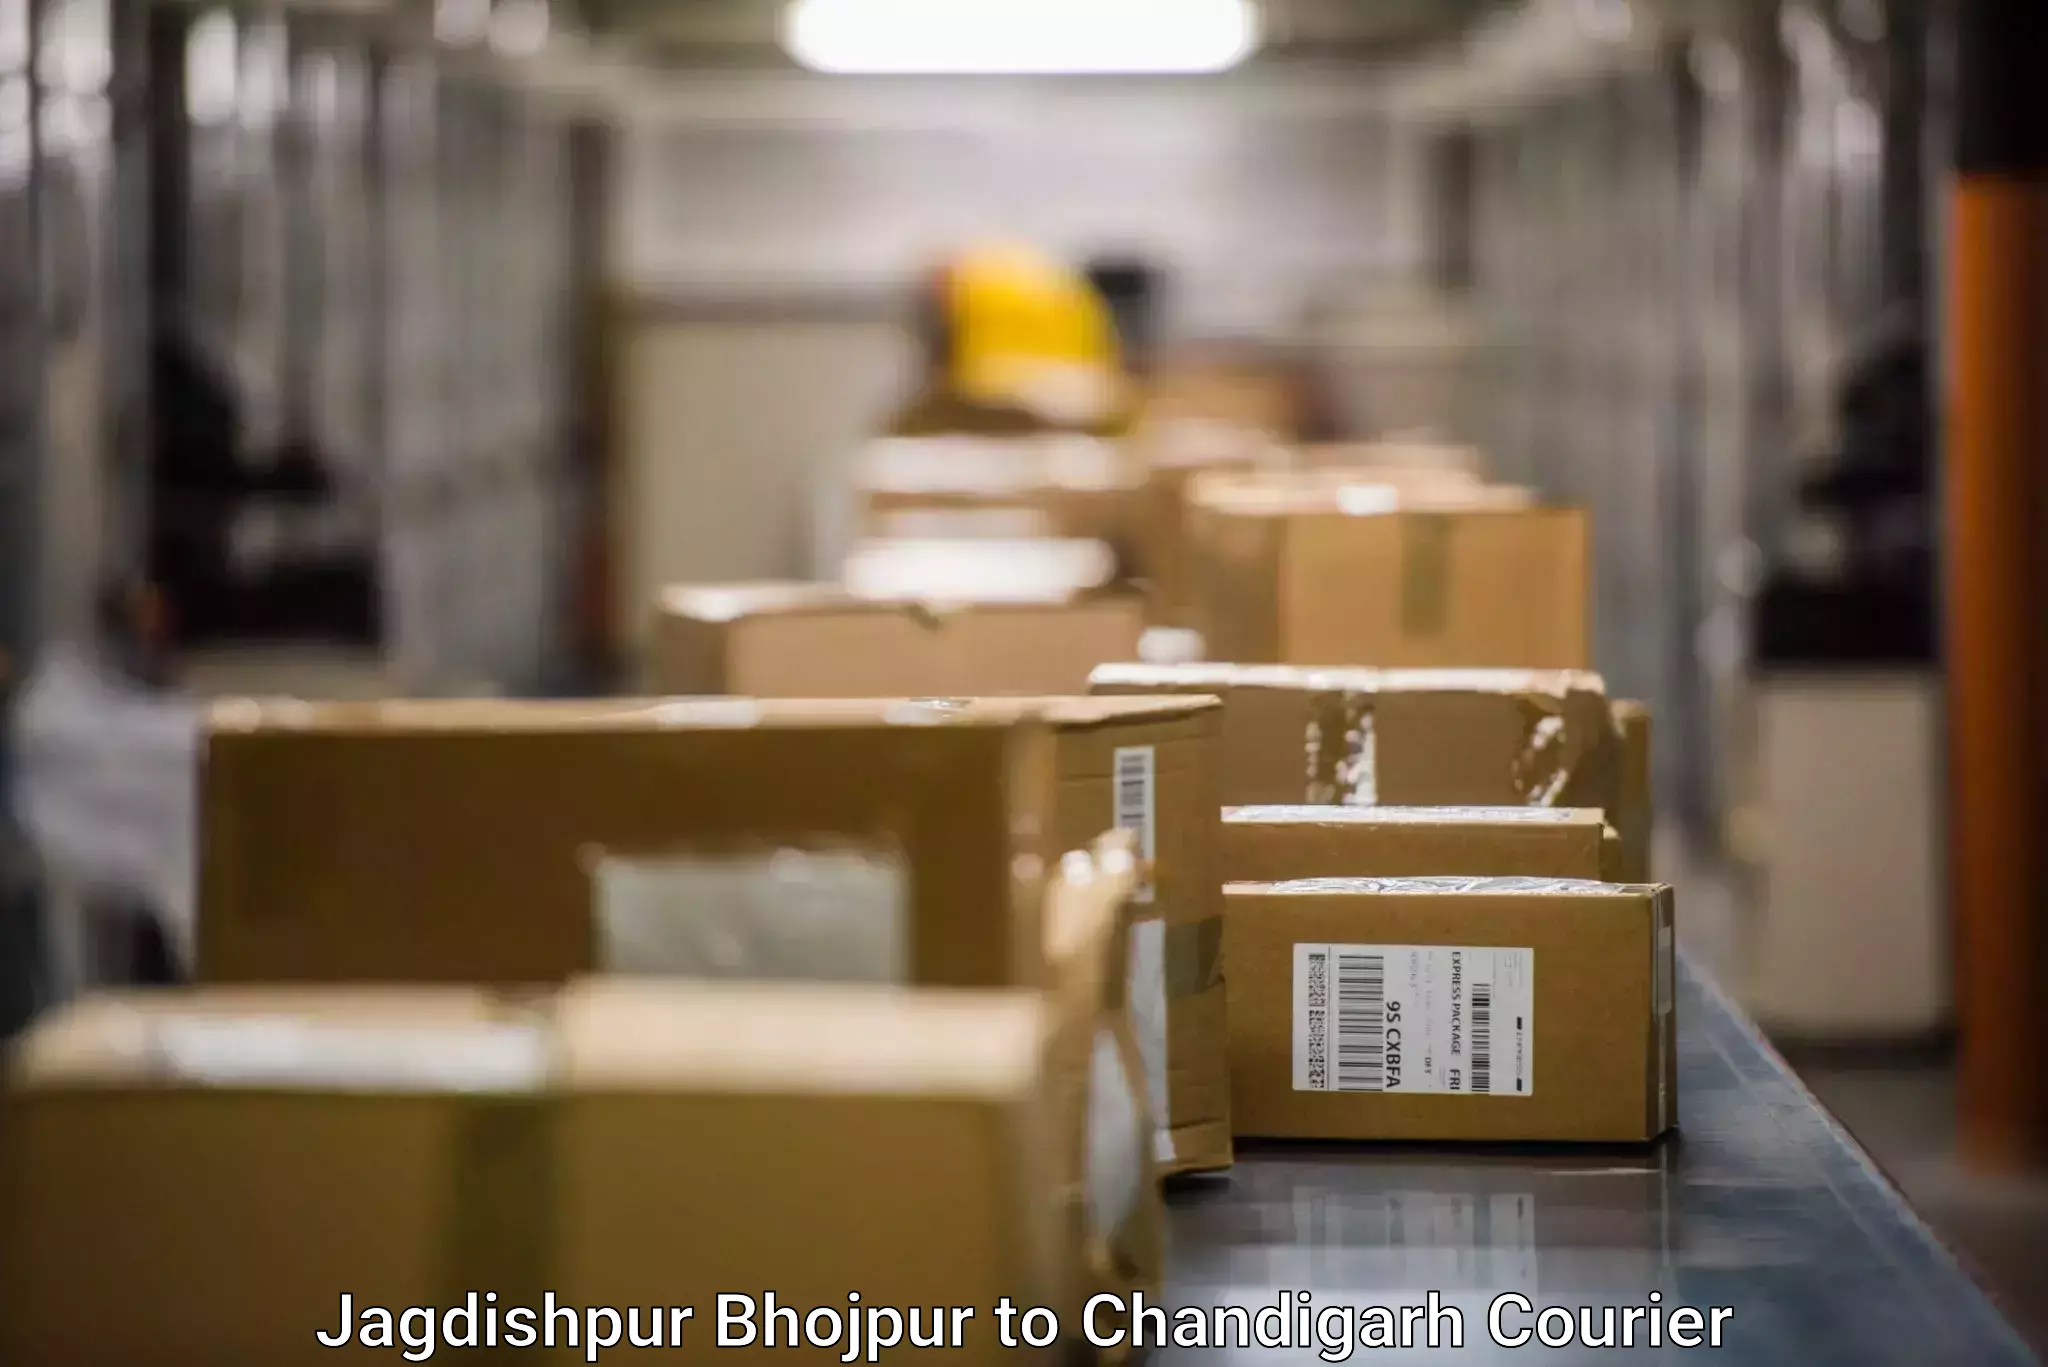 Secure freight services Jagdishpur Bhojpur to Chandigarh